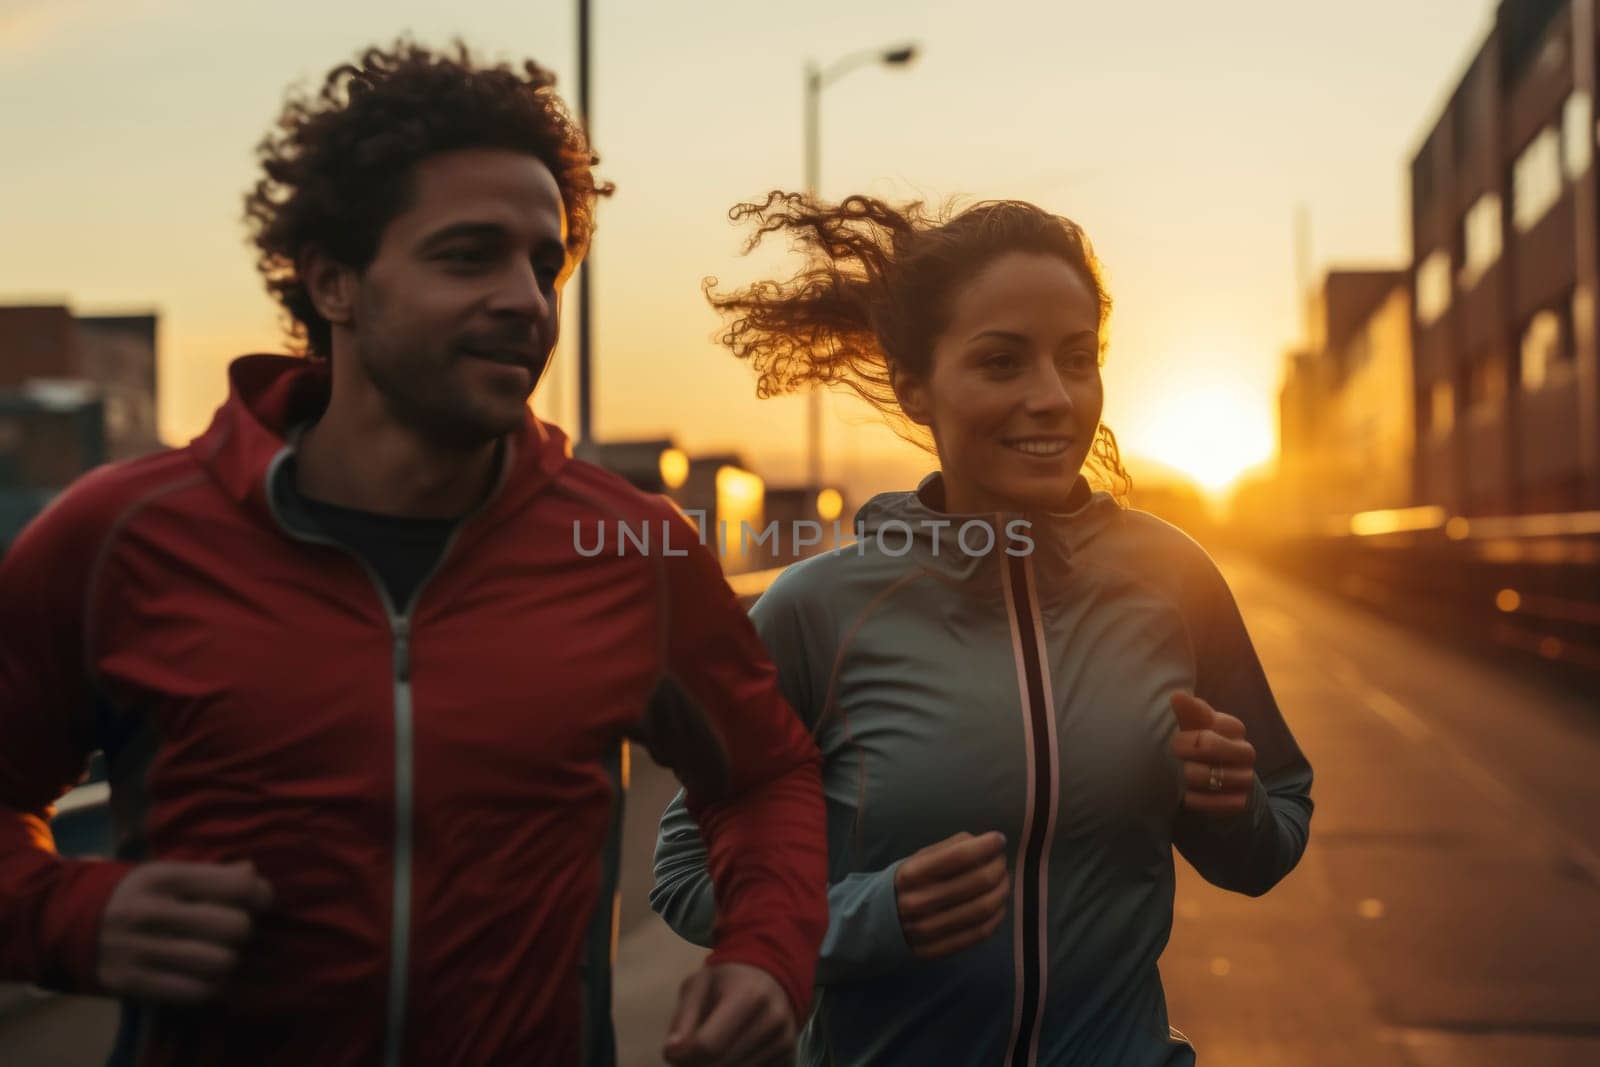 Man and woman jogging at sunset in urban environment. Healthy lifestyle and fitness concept. Outdoor exercise and running theme for design and editorial